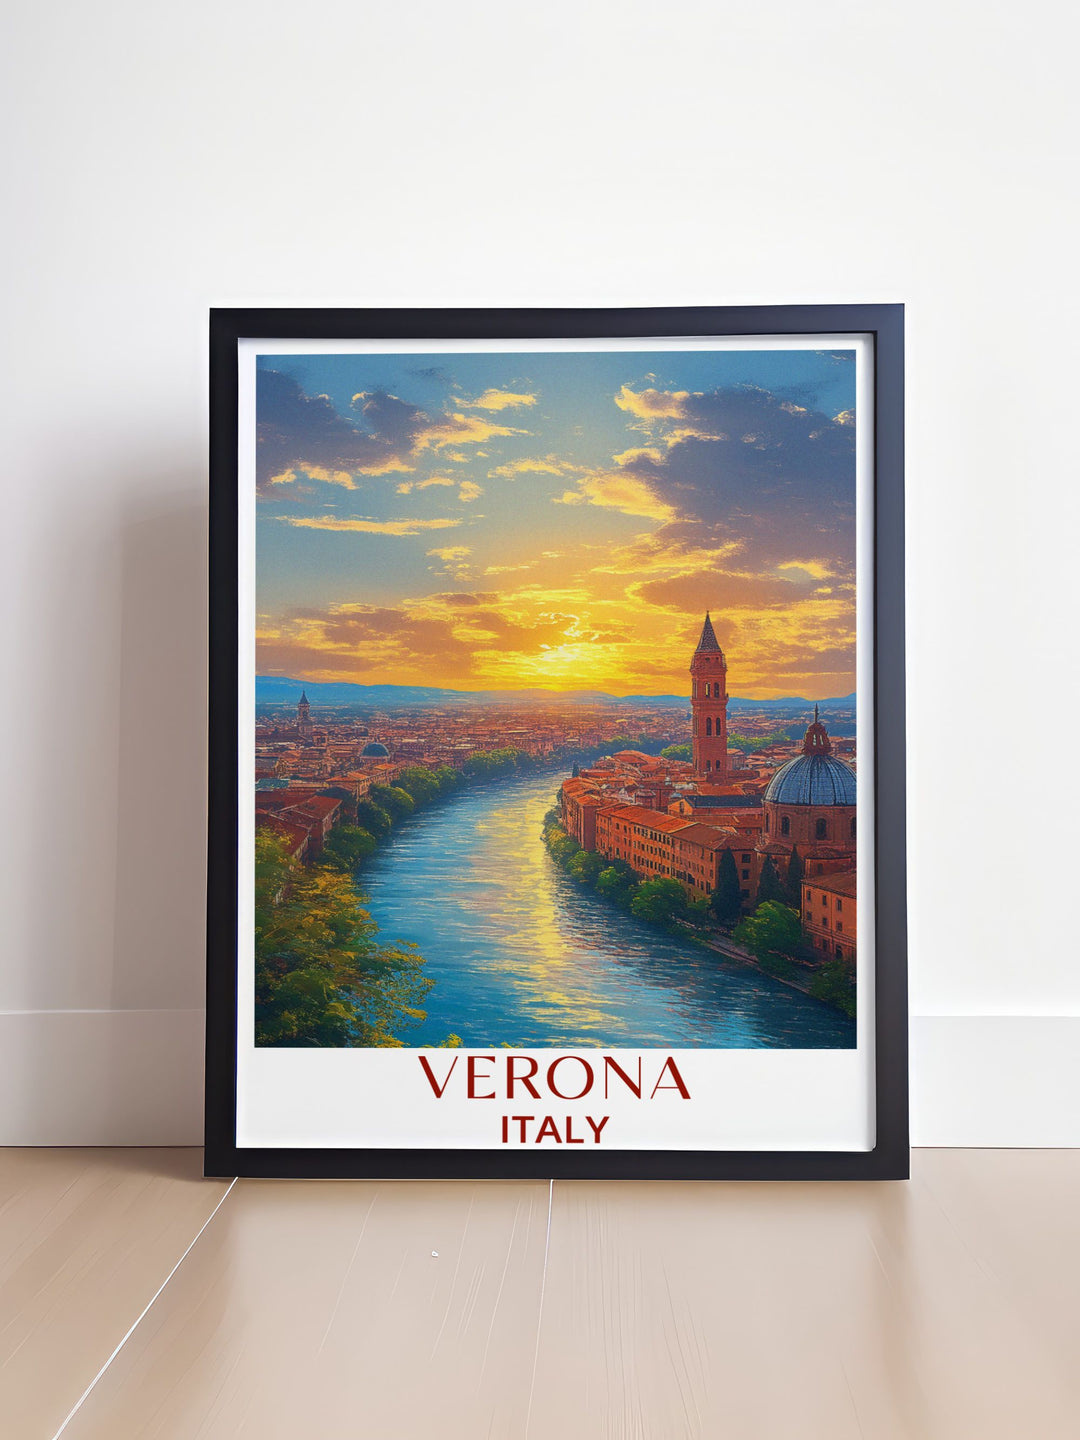 Exquisite Verona wall art showcasing Castel San Pietro a perfect blend of historical beauty and modern design making it an excellent Italy travel gift for lovers of Italian culture and art or a stunning piece for your own home